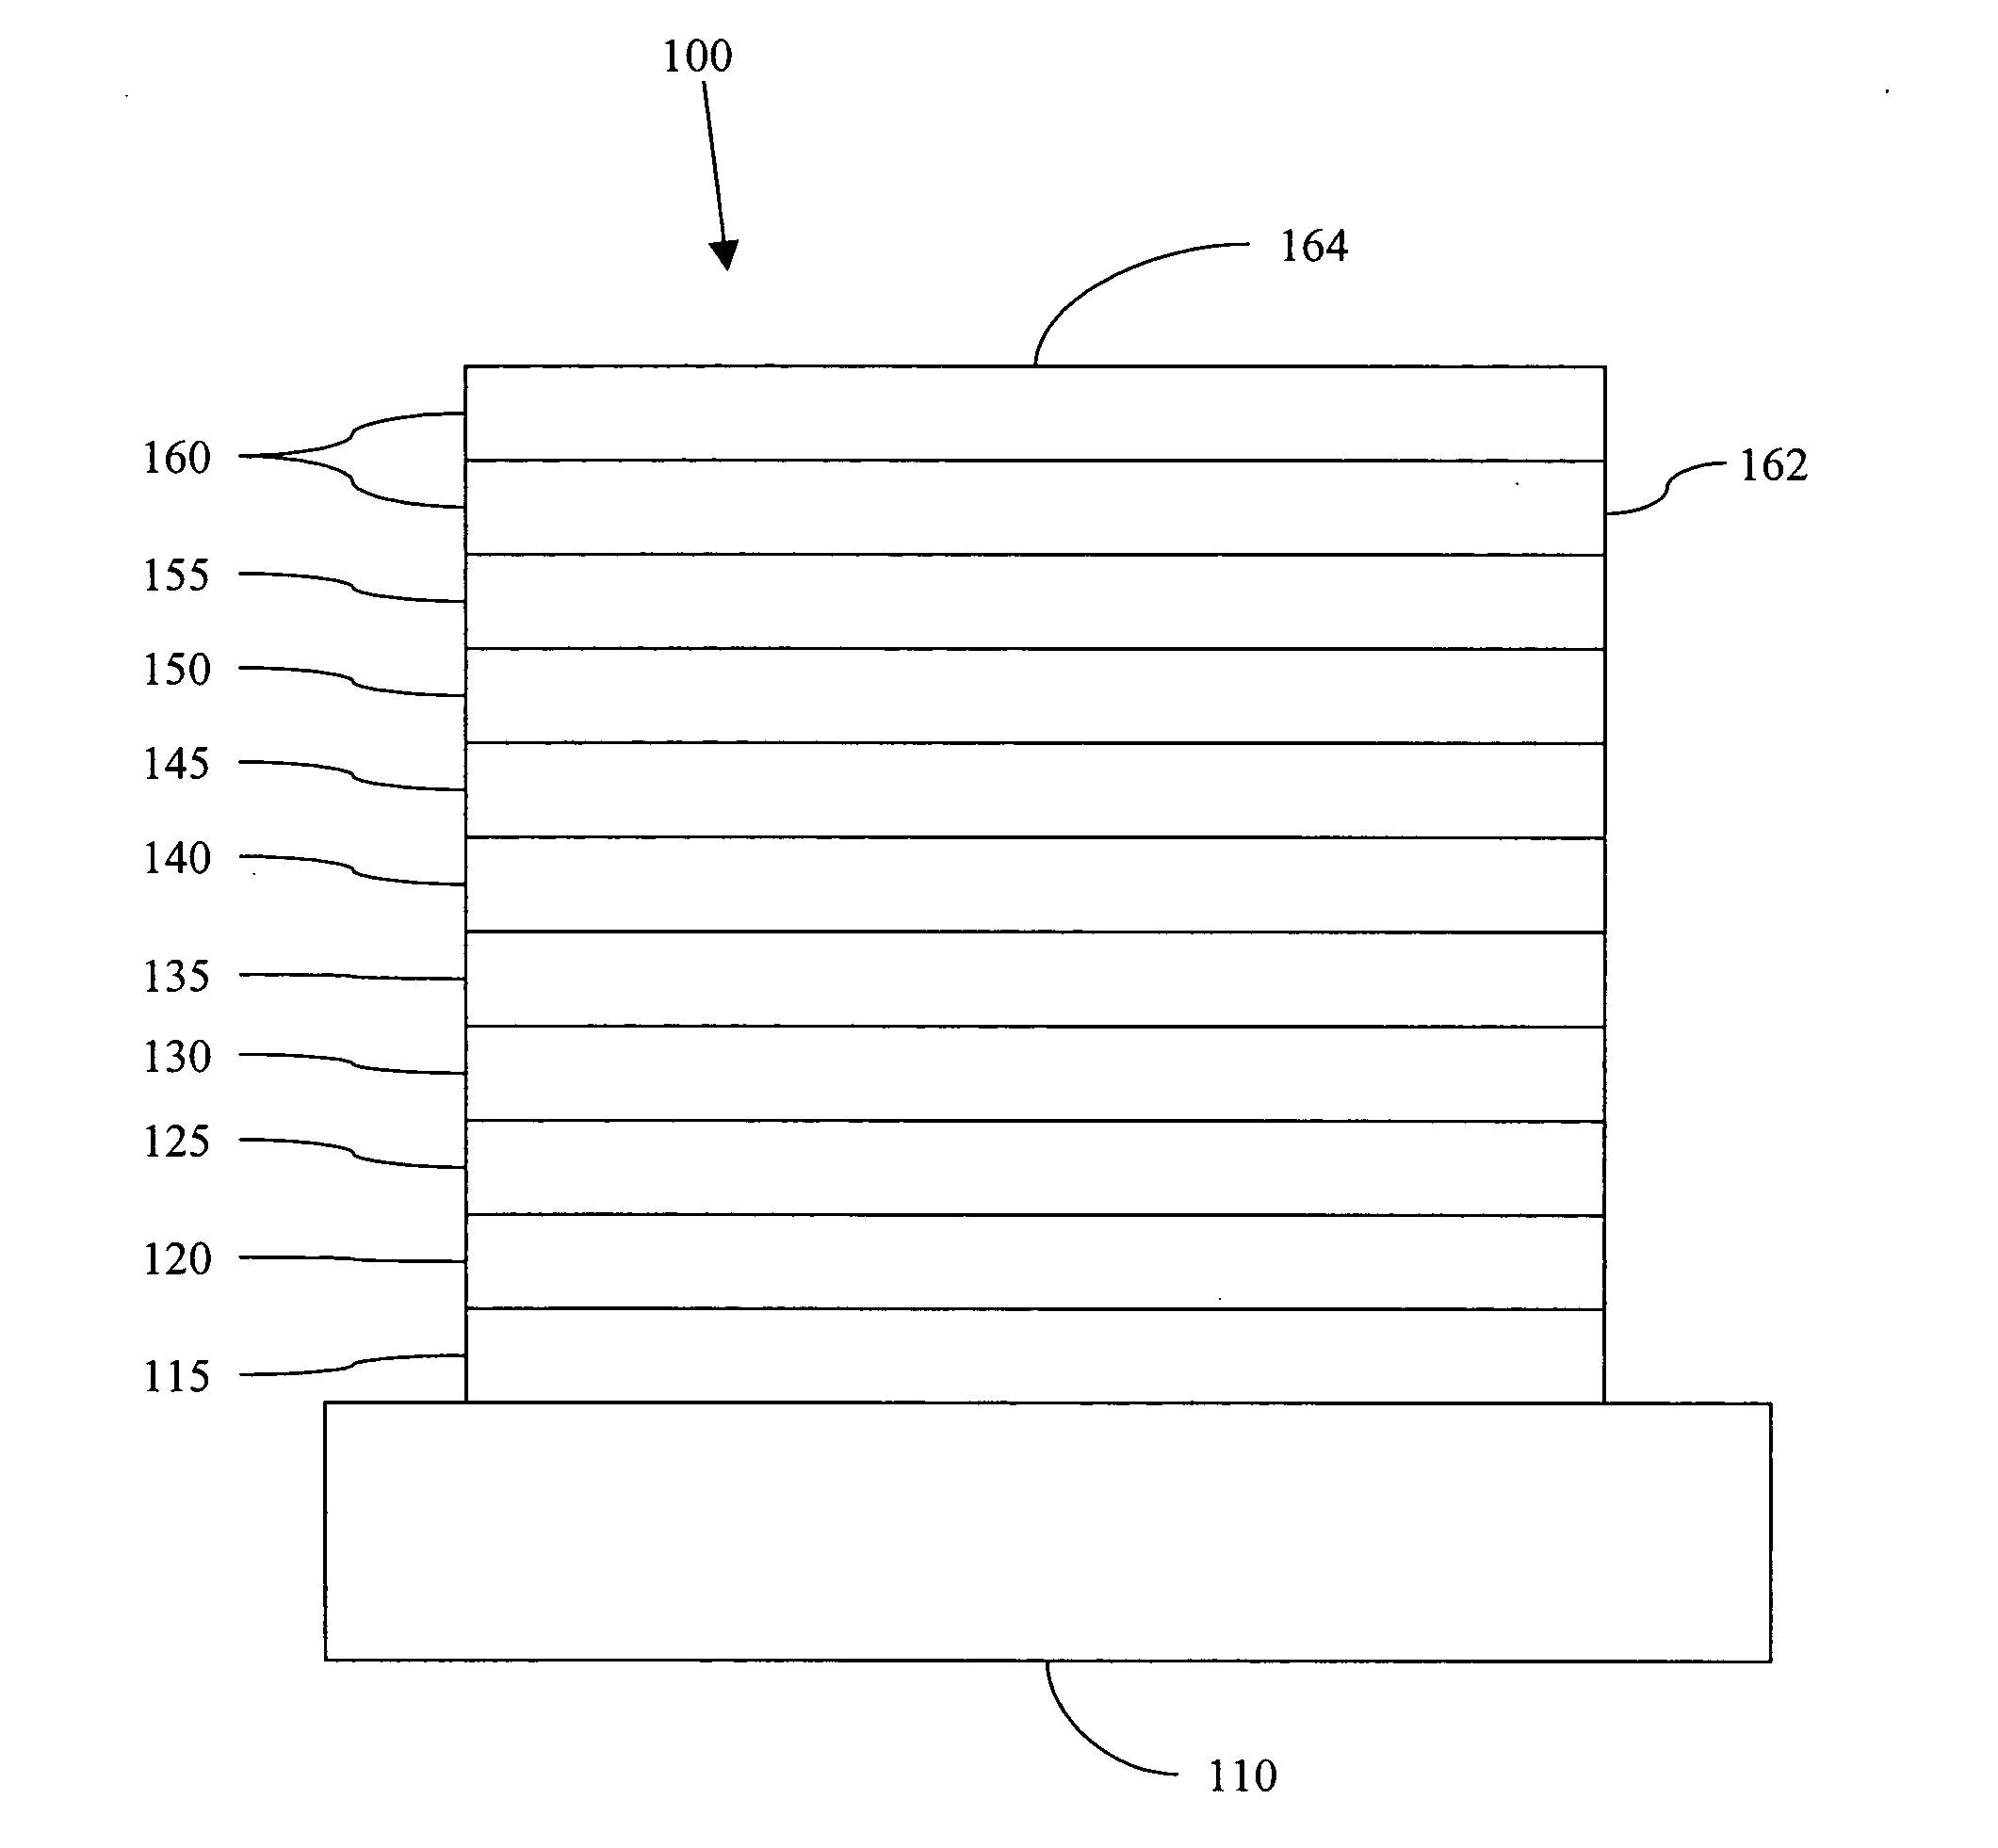 Organic light emitting device structure for obtaining chromaticity stability